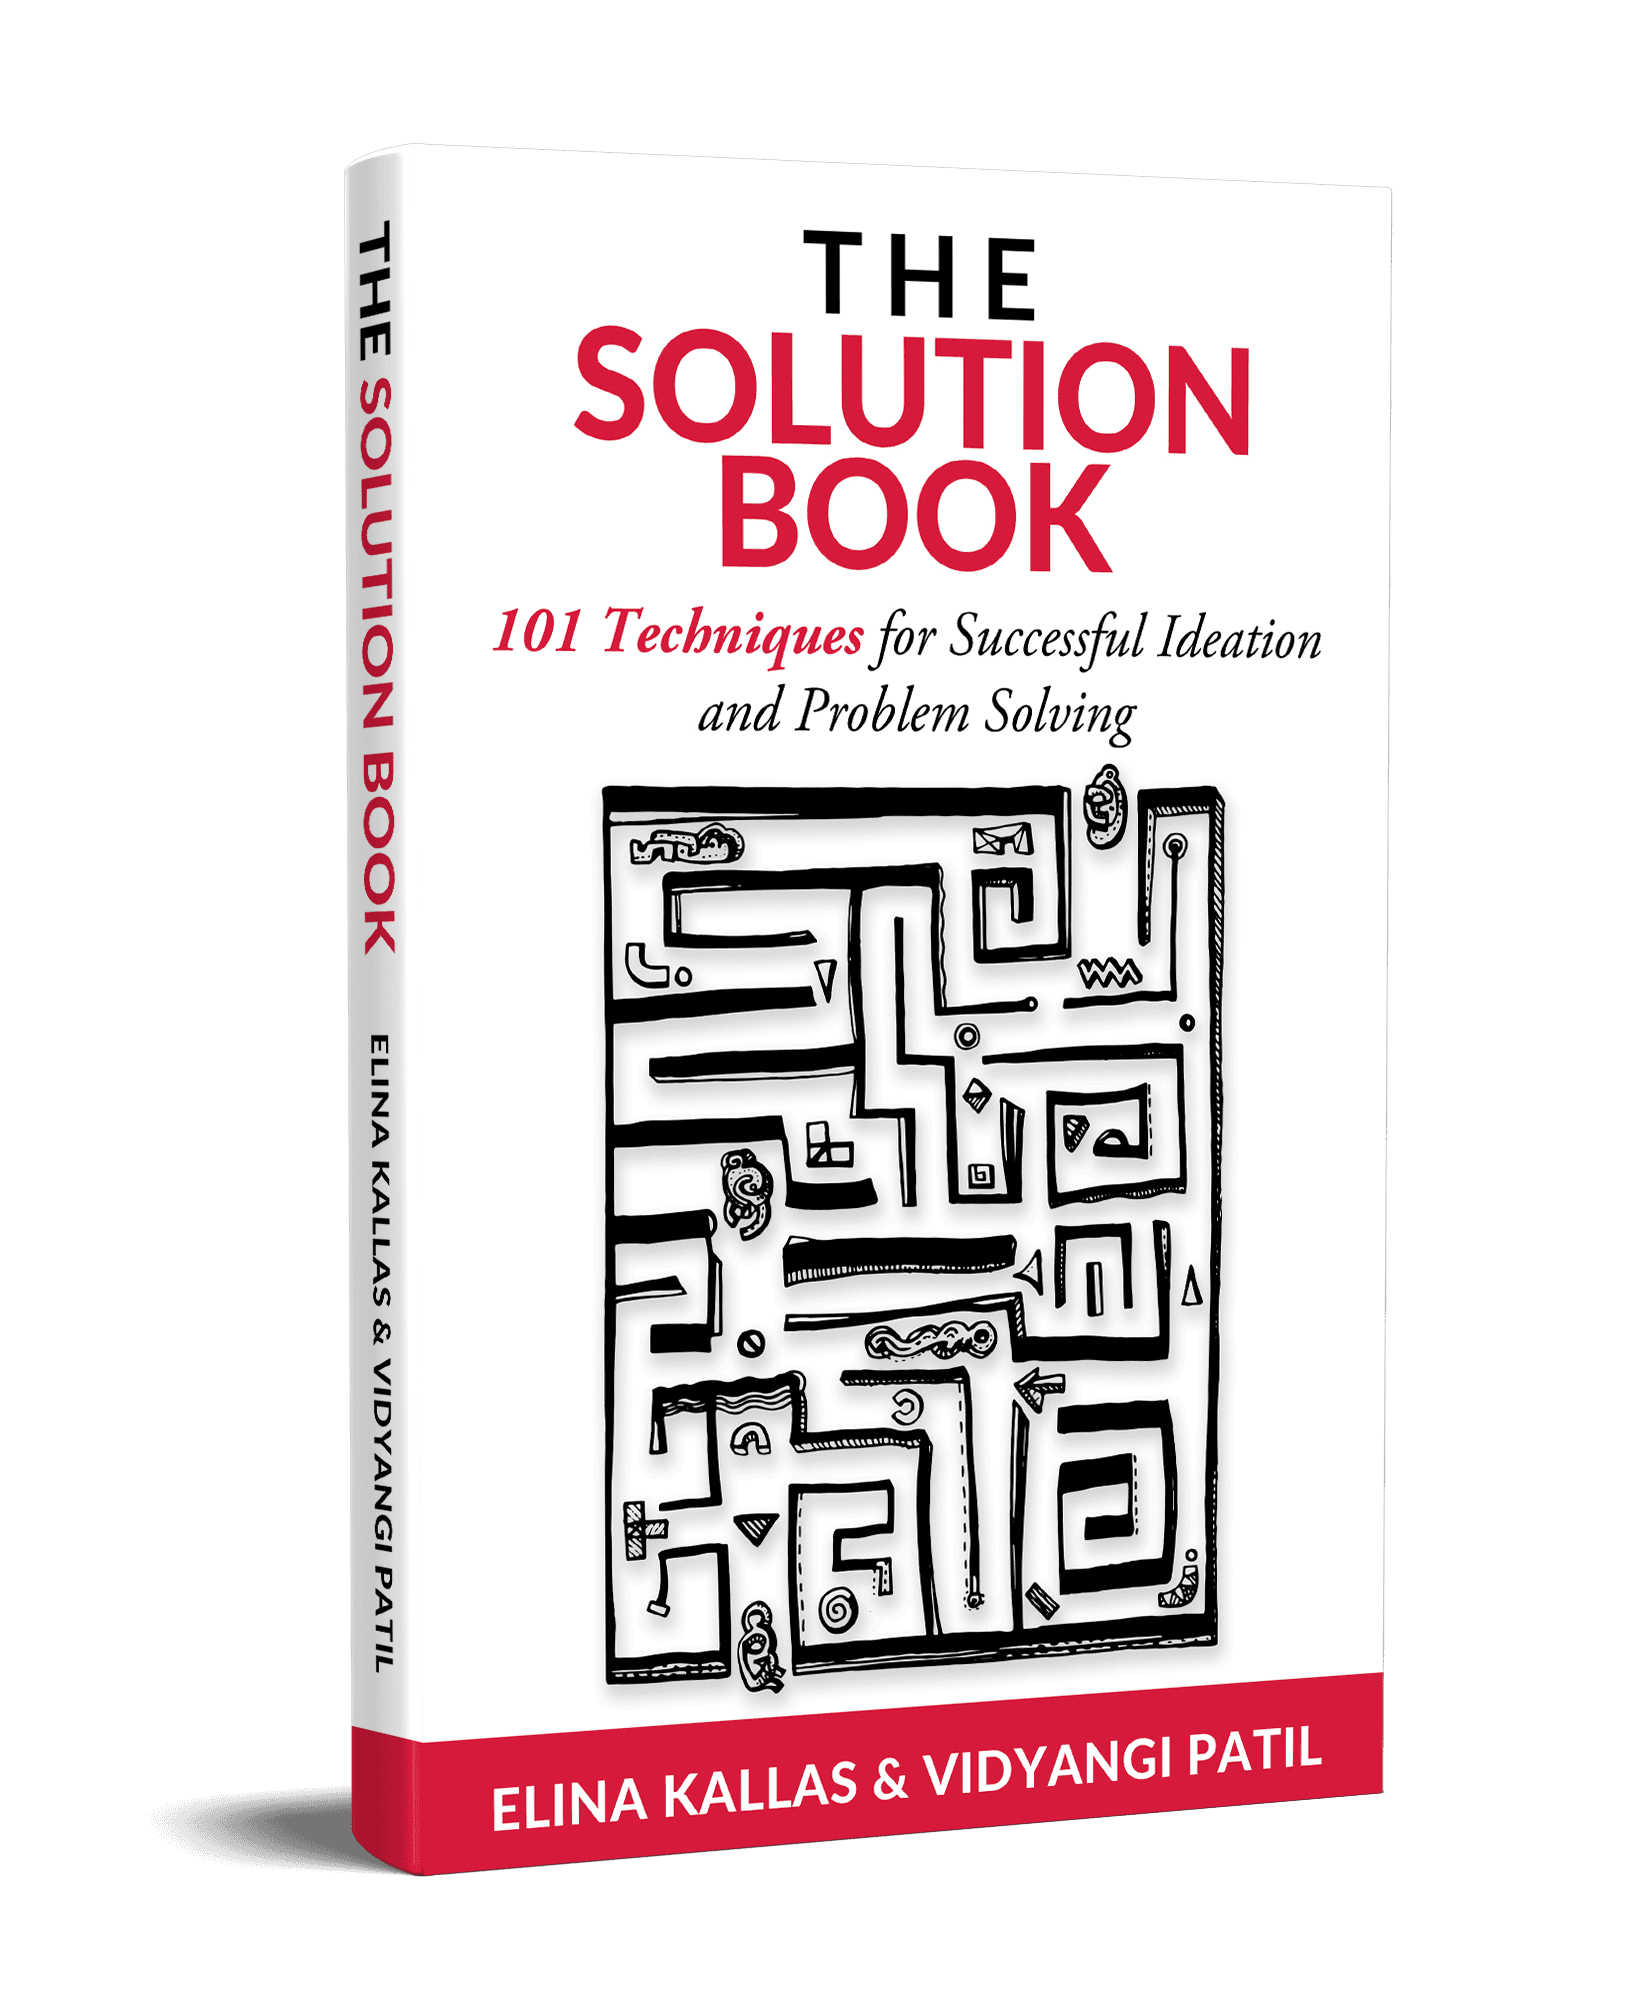 The Solution Book. 101 Techniques for Successful.Ideation and Problem Solving